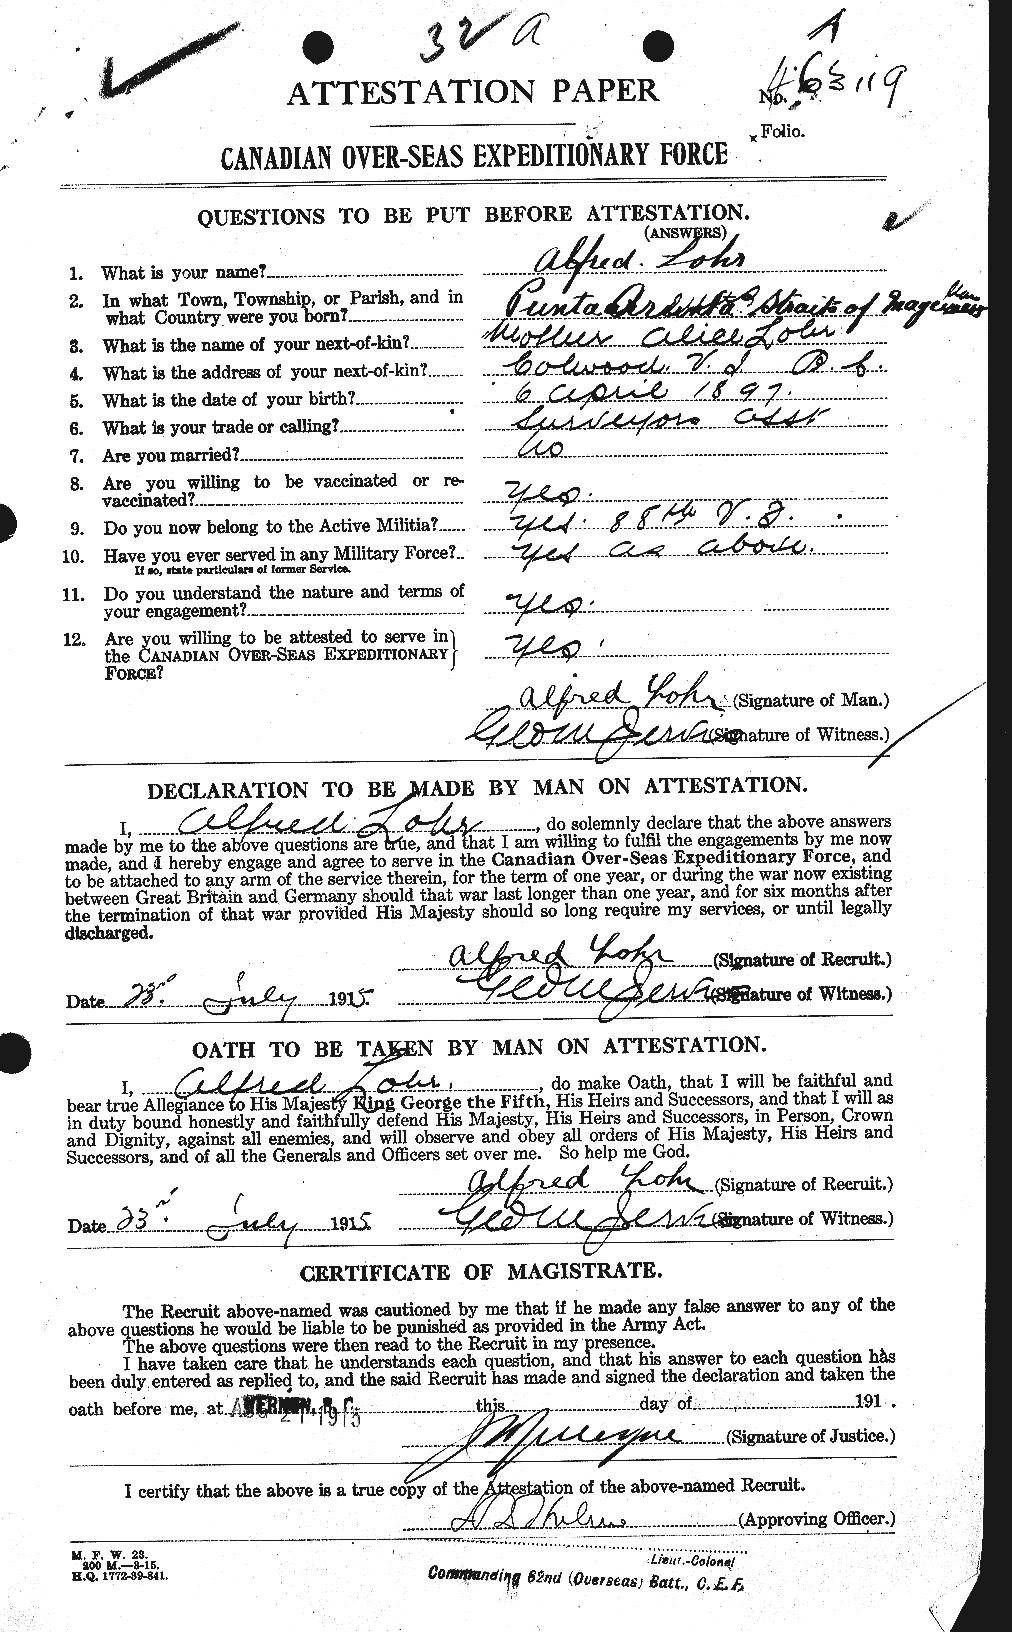 Personnel Records of the First World War - CEF 461955a